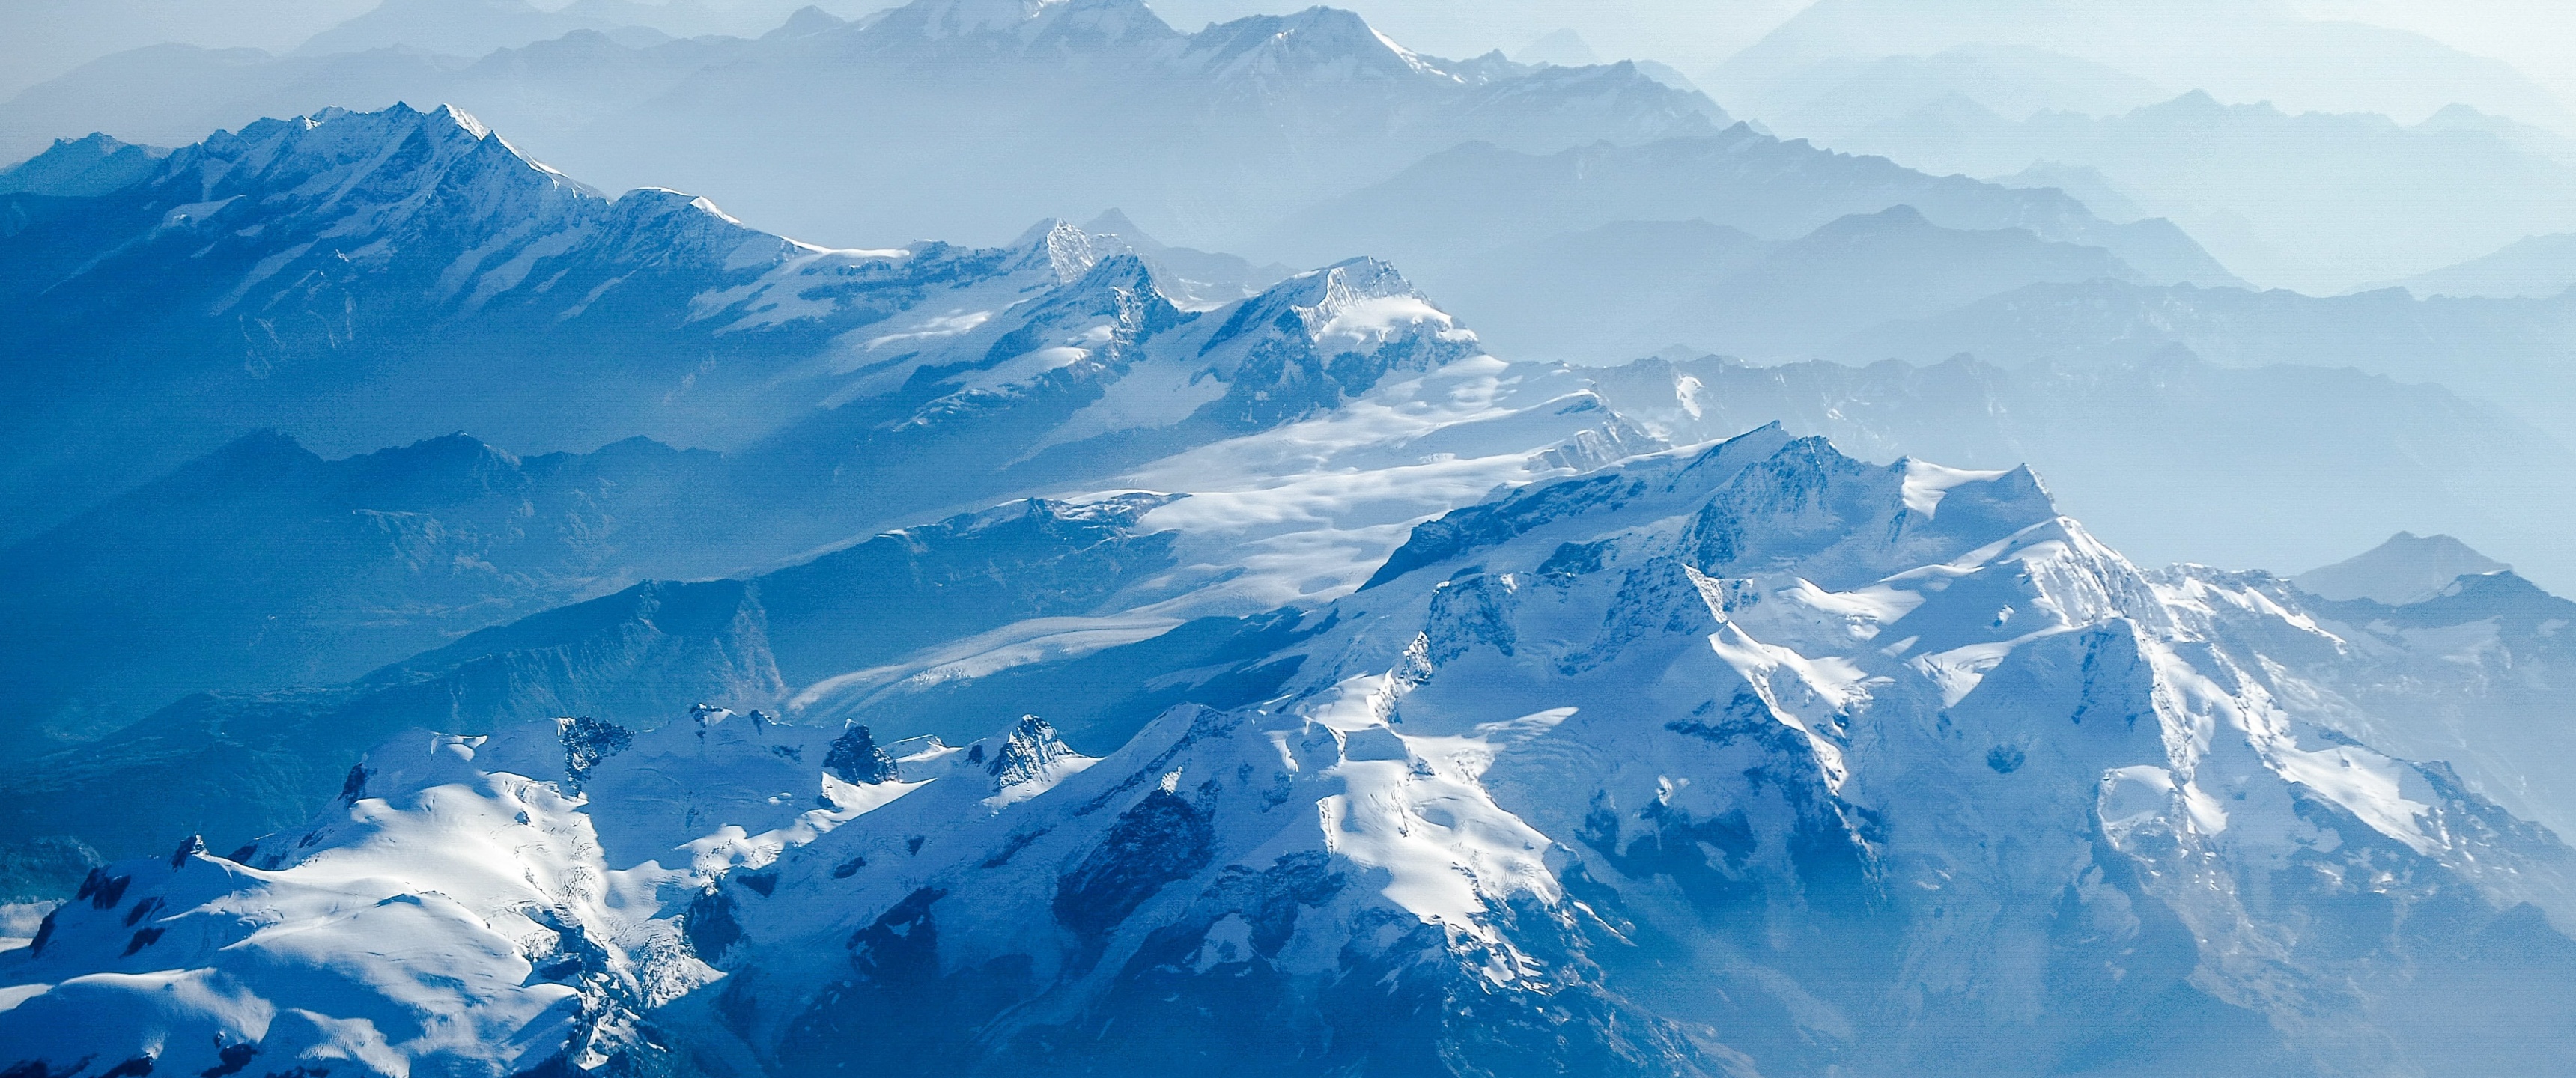 Swiss Alps Wallpaper 4K, Snow covered, Mountains, Nature, #2443